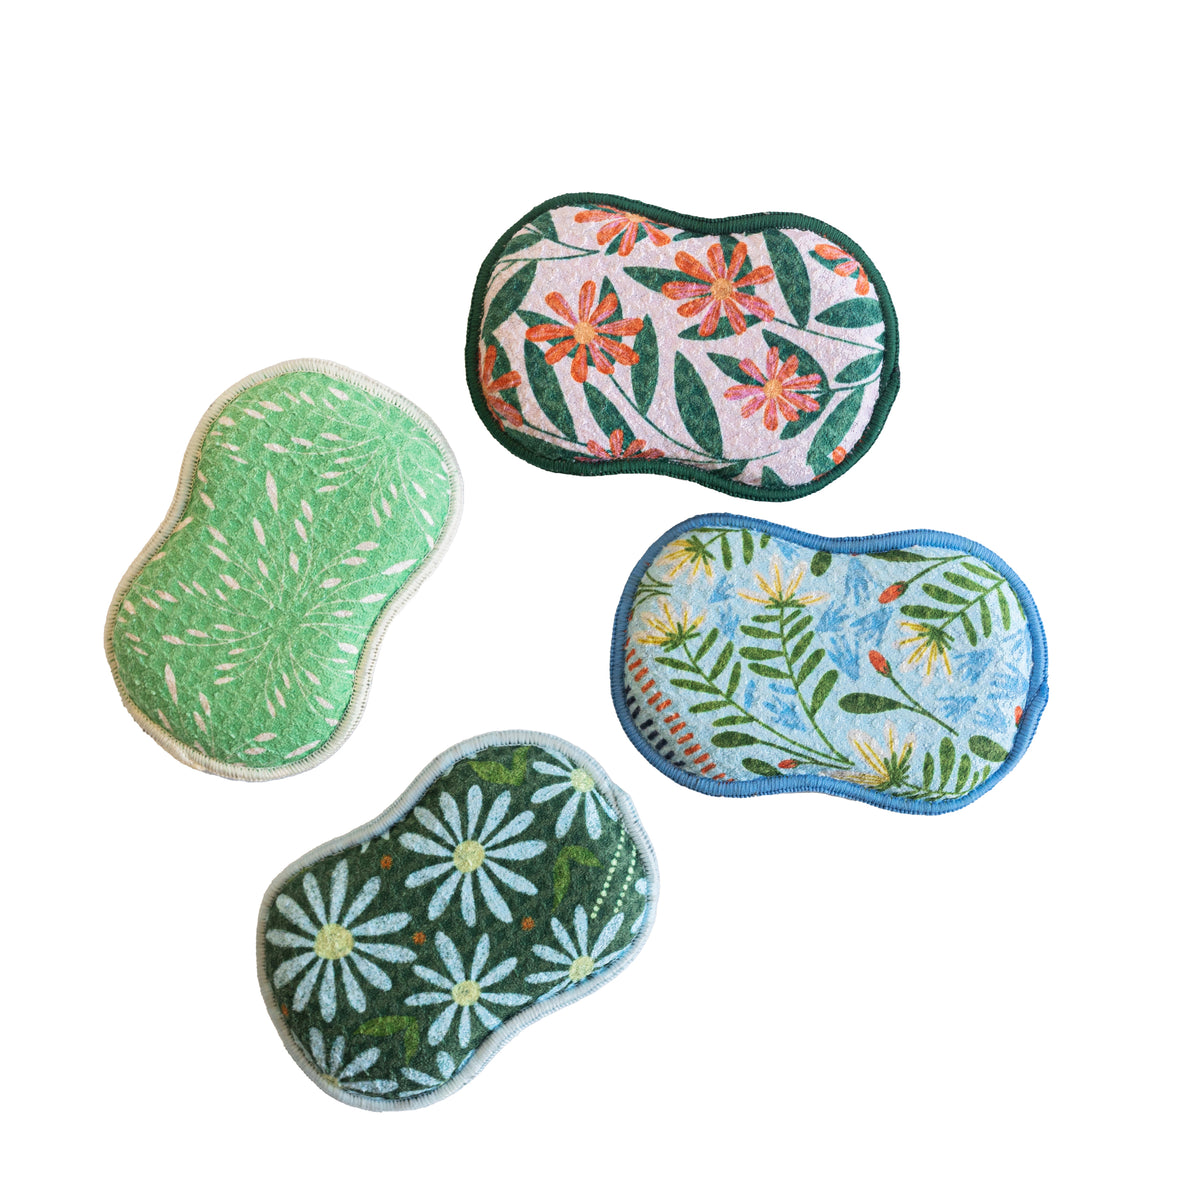 Assorted RE:usable Sponges (Set of 3) - Rebecca Jane Woolbright Collection Spring Fling Sponges &amp; Scouring Pads Once Again Home Co.   